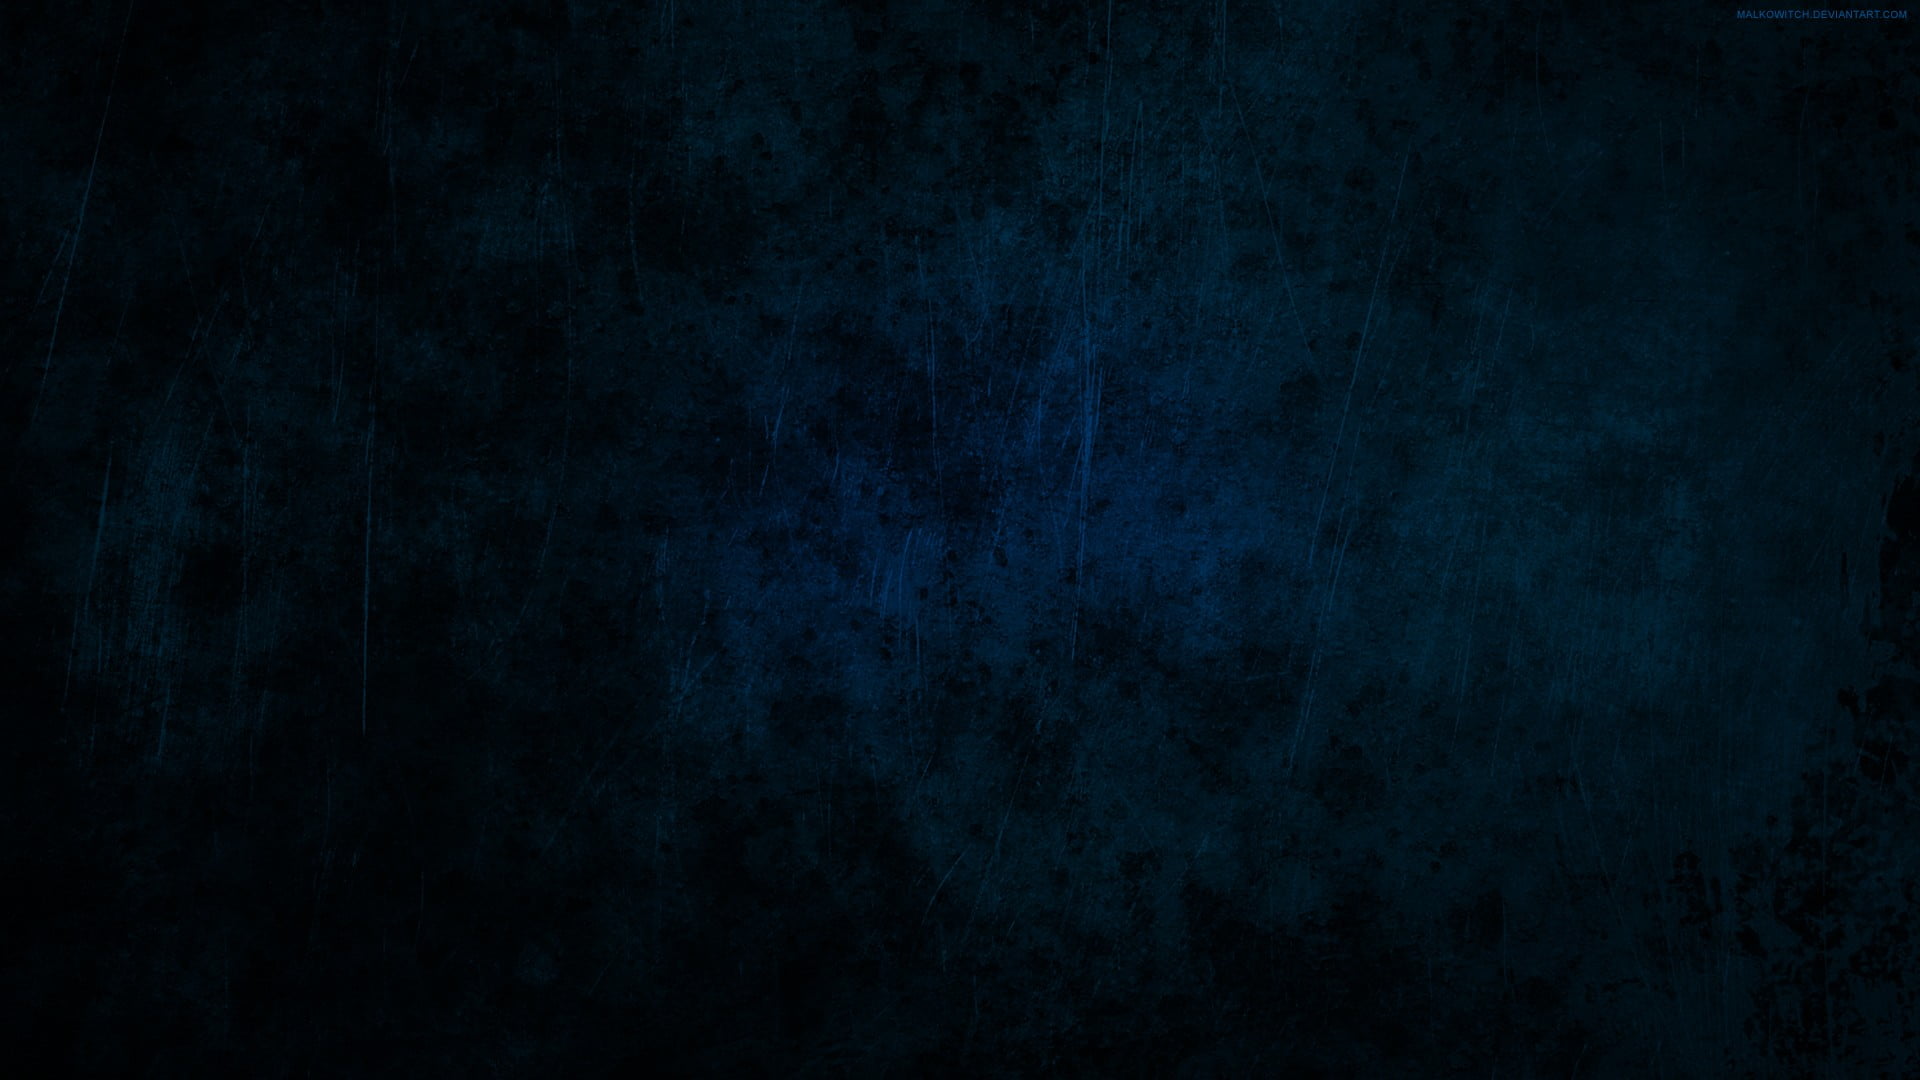 dark, blue, backgrounds, abstract, textured, pattern, old, dirty